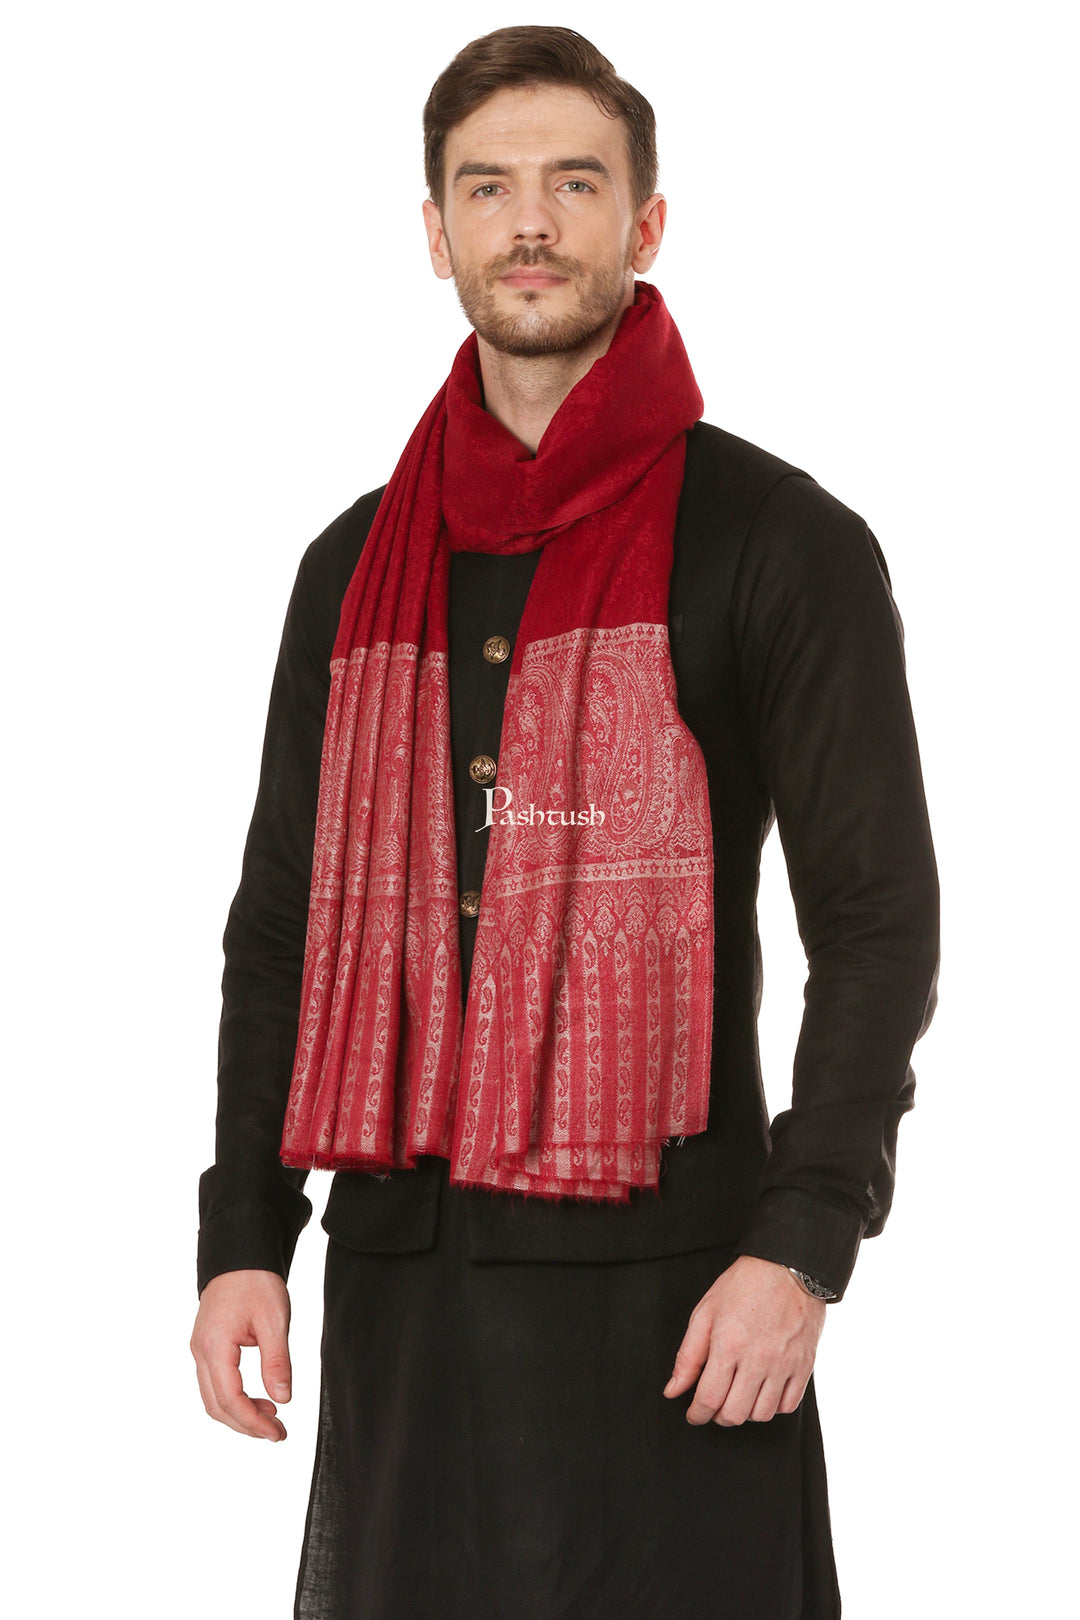 Pashtush India Mens Scarves Stoles and Mufflers Pashtush Mens Stole, Fine Wool Jacquard Weave, Soft And Light Weight Maroon